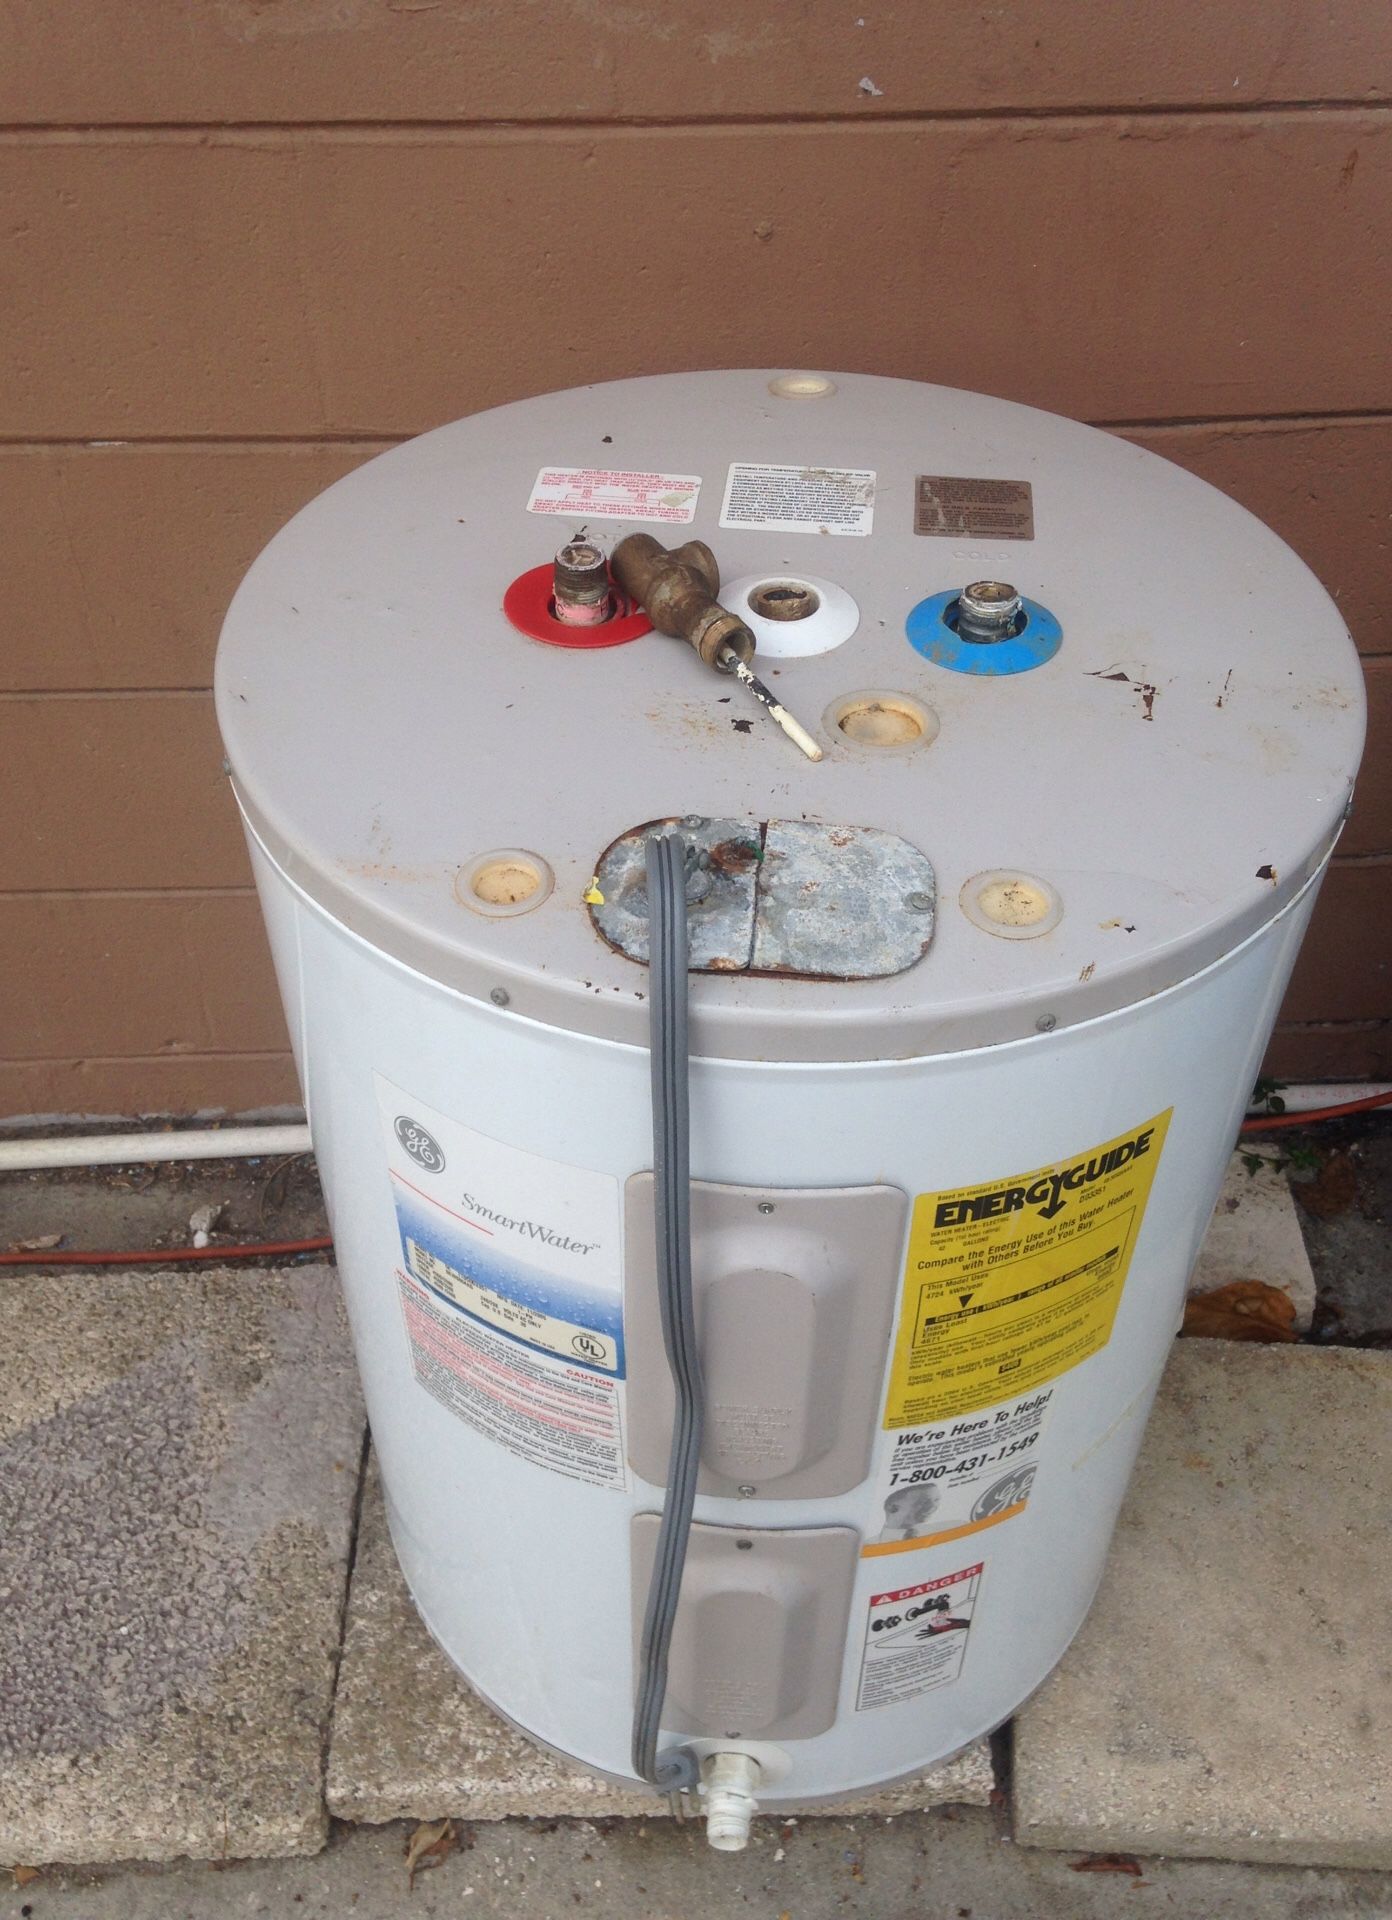 General Electric hot water heater